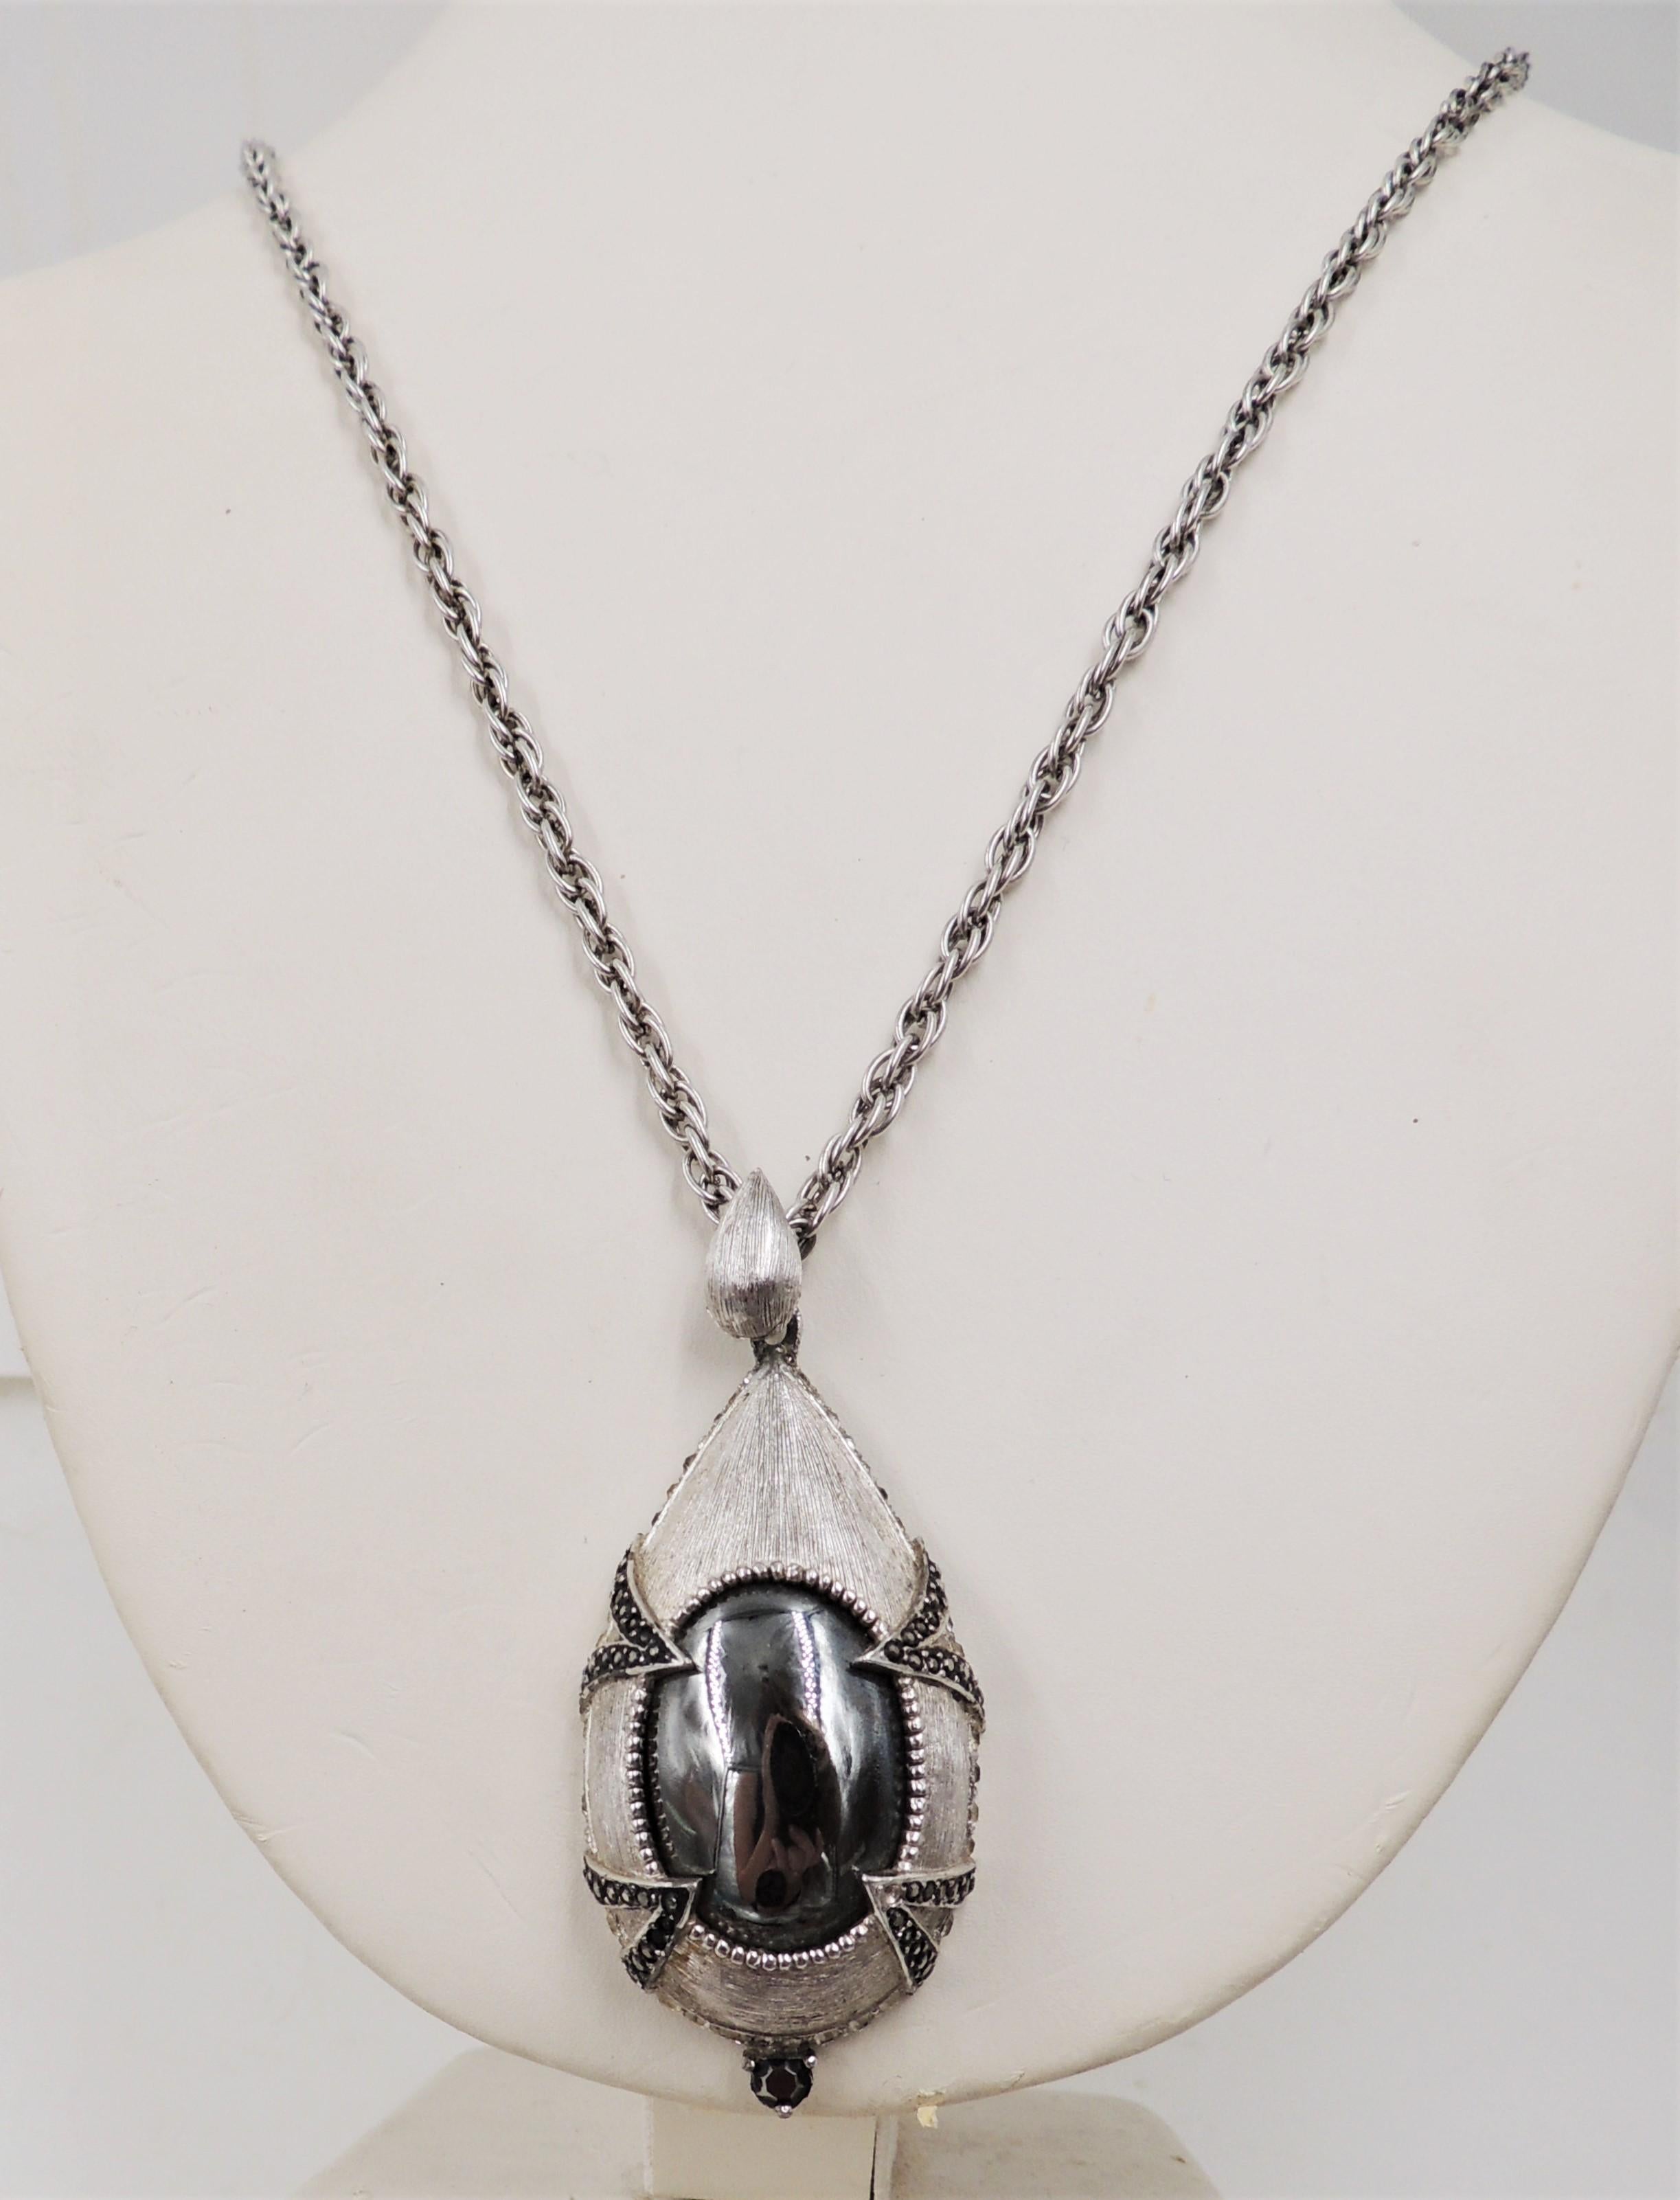 Vintage Avon of Belleville Rhodium Plated Faux-Hematite Pendant Necklace In Excellent Condition For Sale In Easton, PA